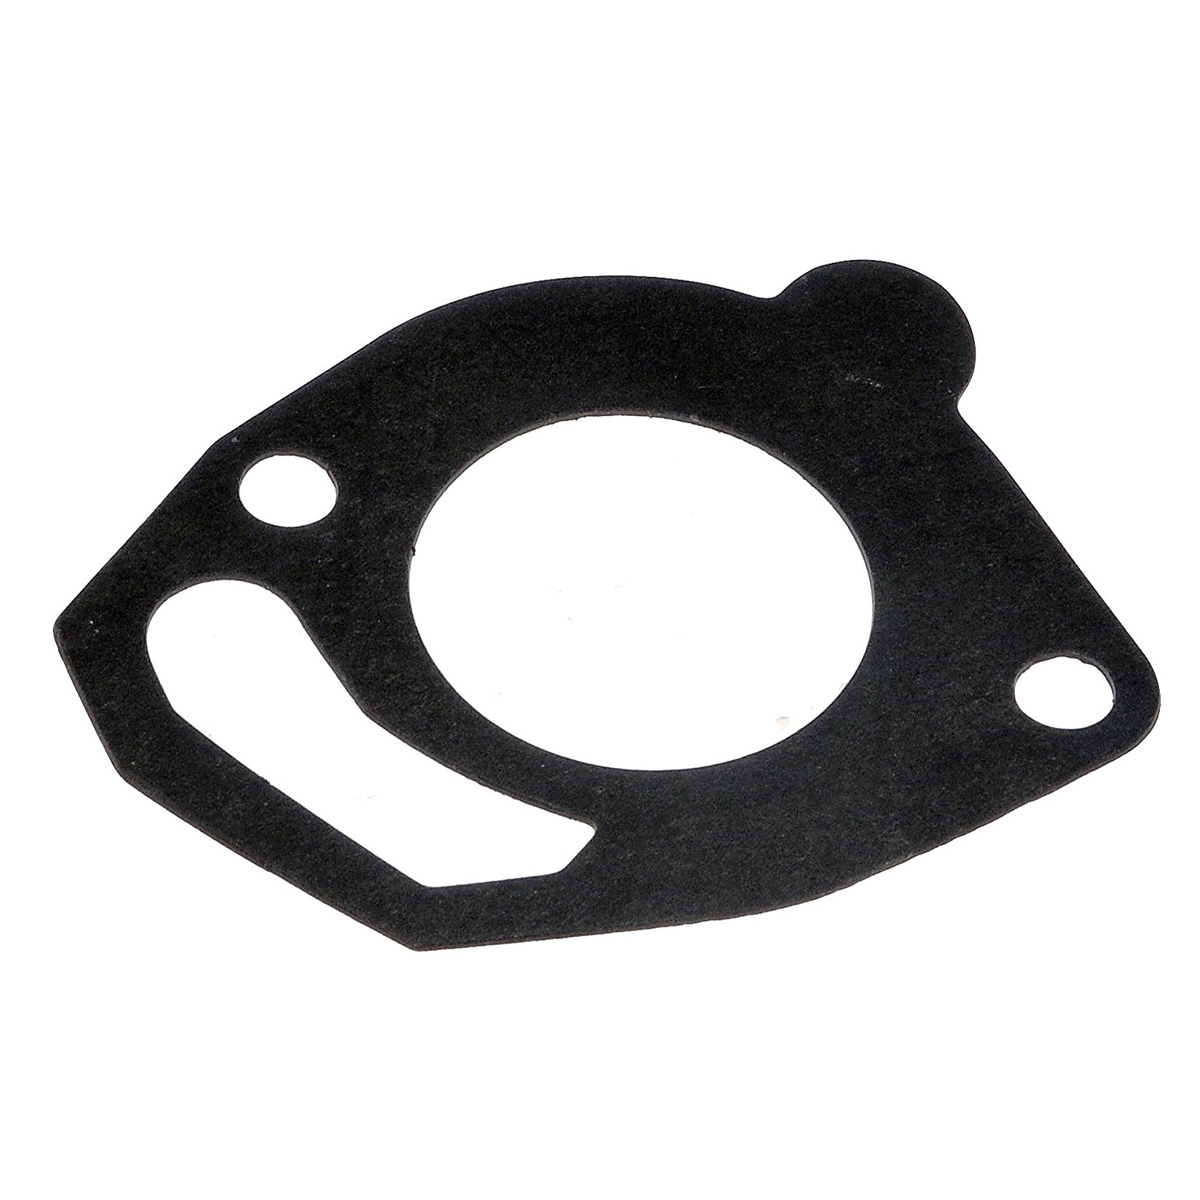 VAUXHALL AND OPEL SINTRA Thermostat Gasket